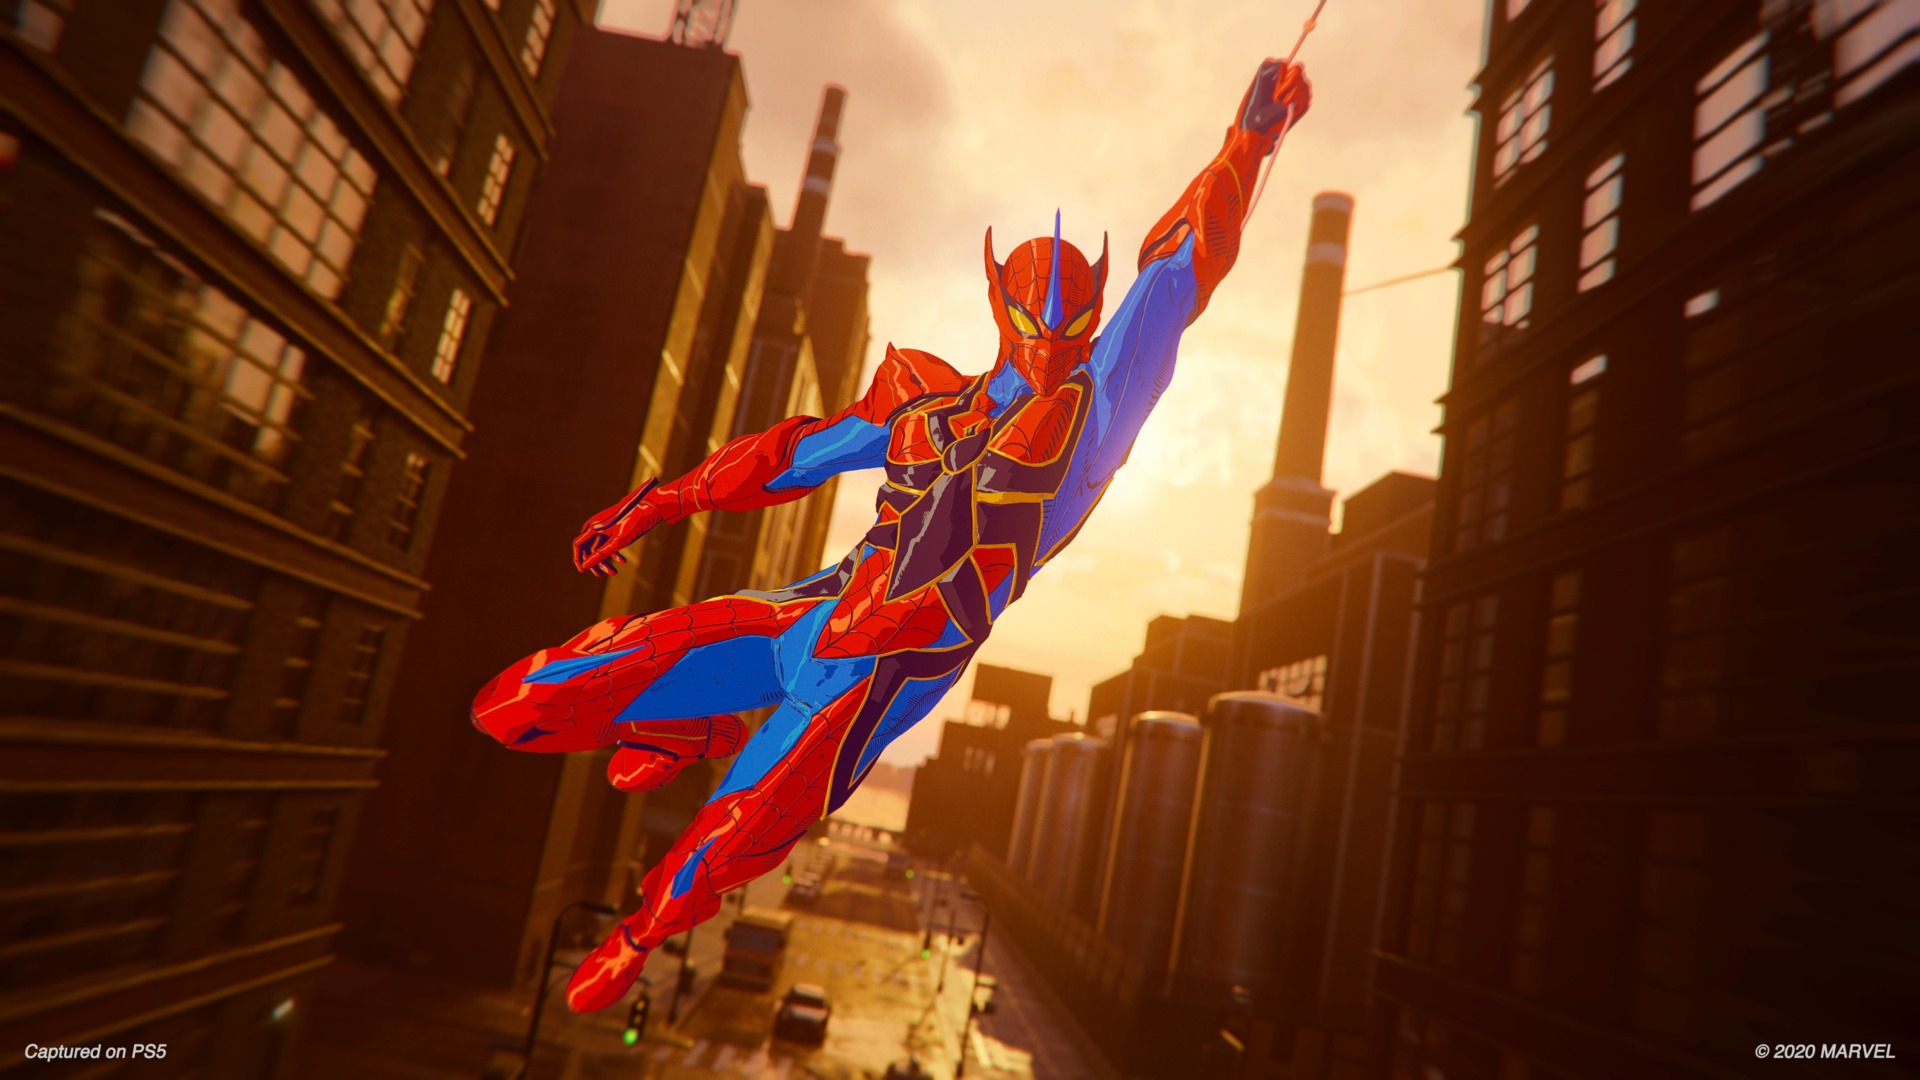 Spider-Man PS4 game saves will carry over to PS5, Insomniac confirms -  Polygon